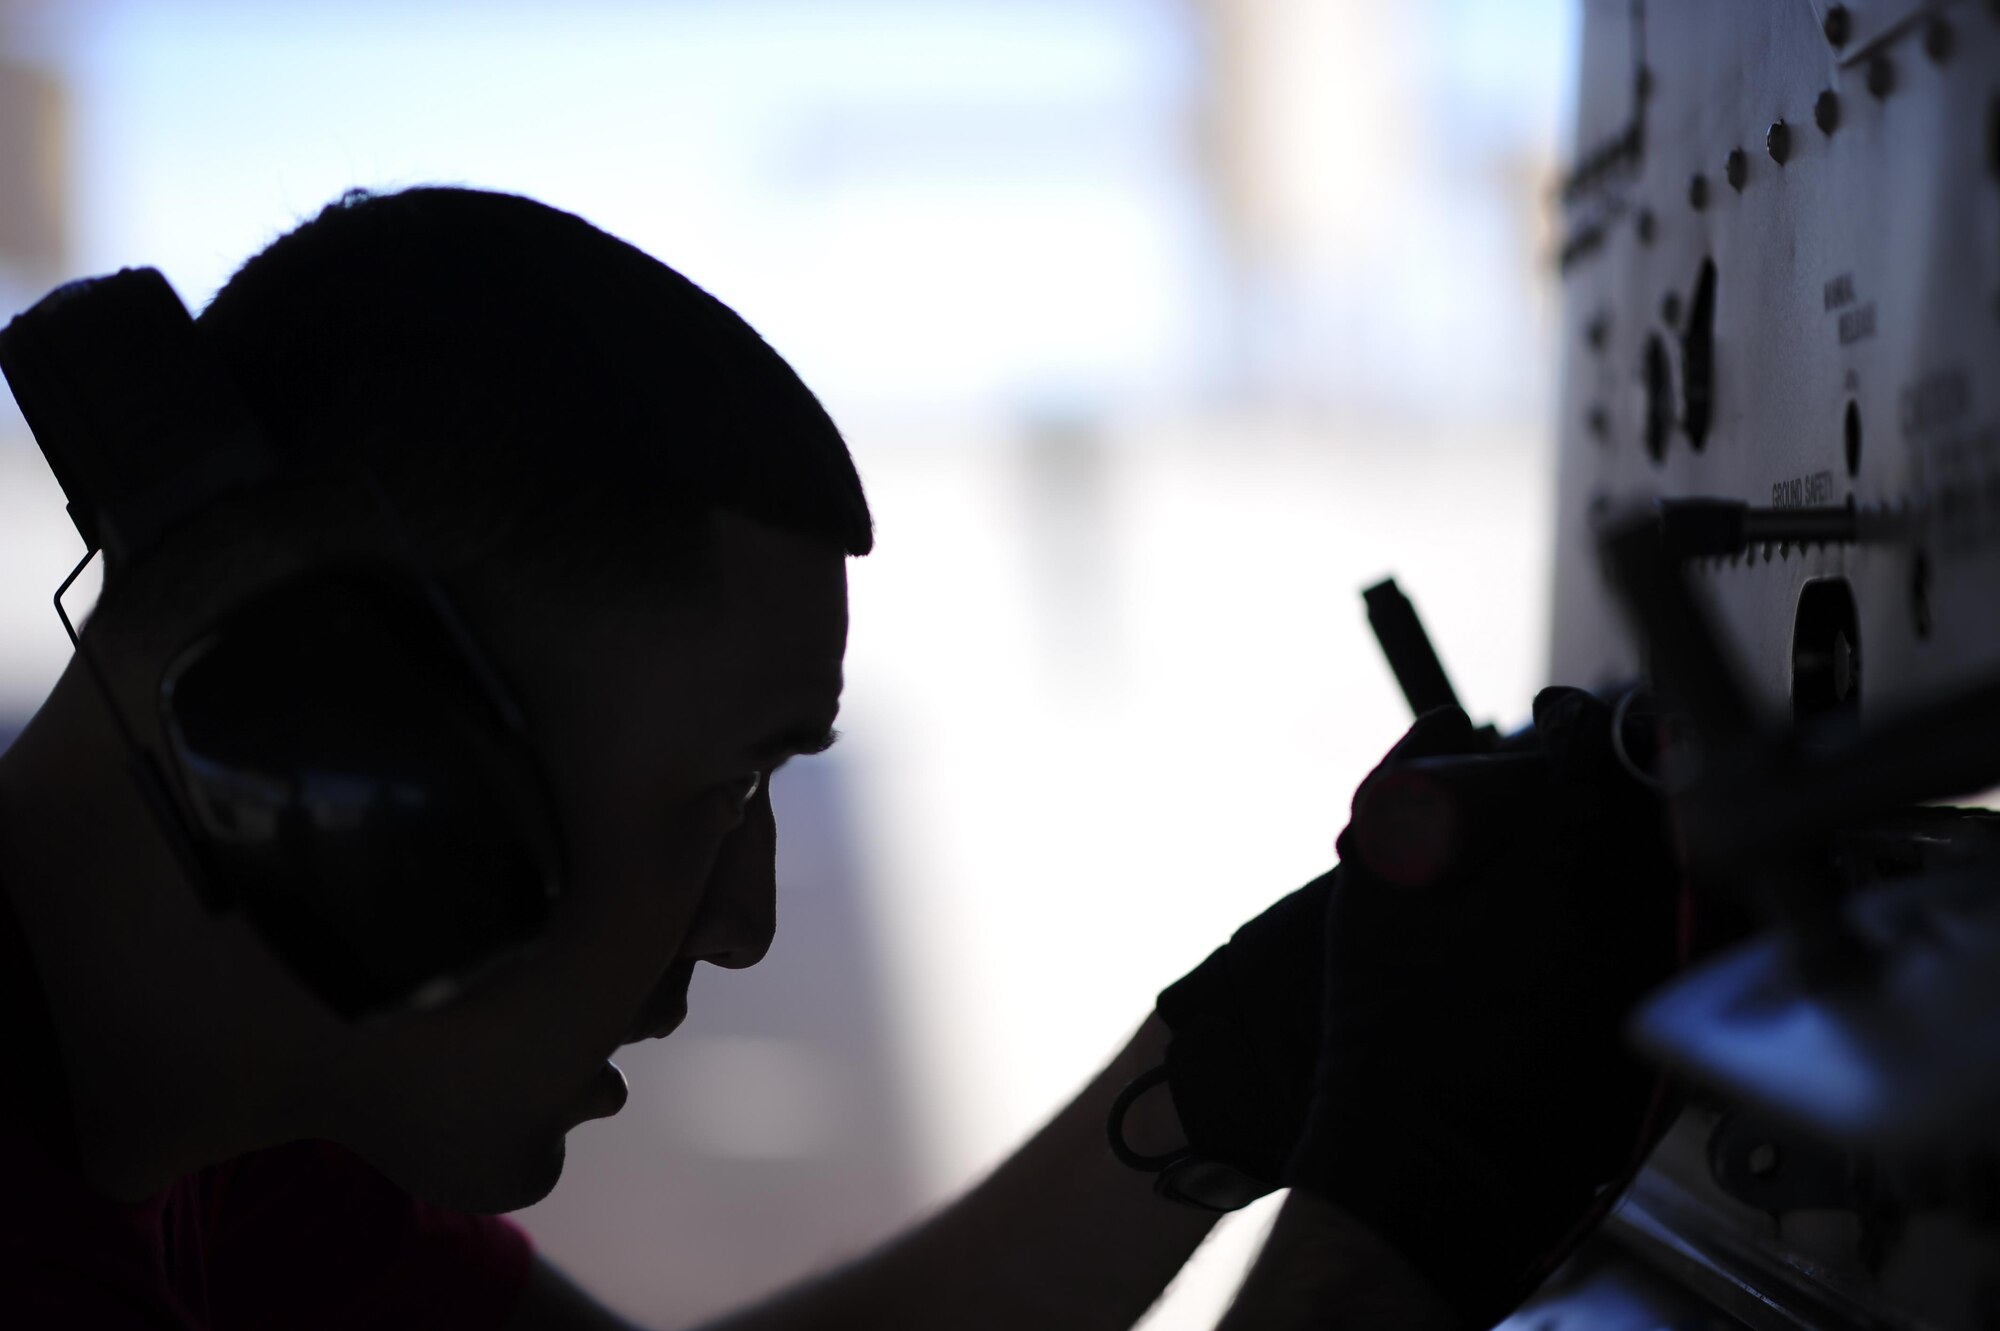 U.S. Air Force Airman 1st Class Edgar Baez-Lopez, 355th Aircraft Maintenance Squadron weapons load crew member, sets the ejector feet on the loaded station of an A-10C Thunderbolt II during a weapons load crew competition at Davis-Monthan Air Force Base, Ariz., Oct. 7, 2016. This quarter's weapons load crew competition was between the 354th, 357th and 924th aircraft maintenance units. (U.S. Air Force photo by Senior Airman Chris Drzazgowski)